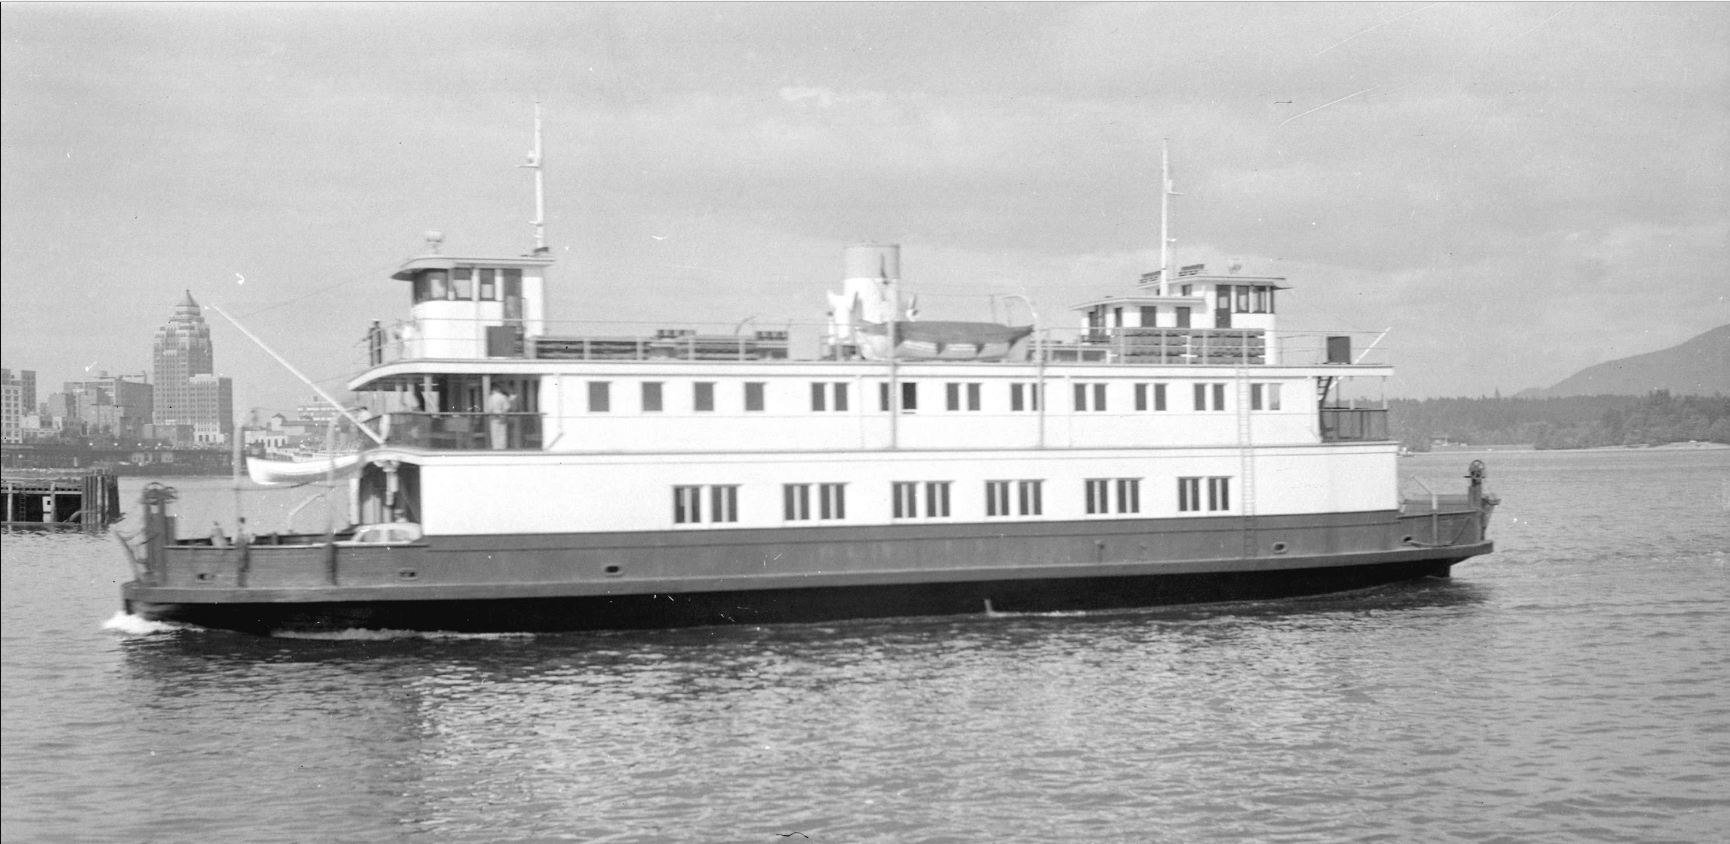 Ferry No. 5 in 1958. Photo courtesy Vancouver Archives 447.7232.1